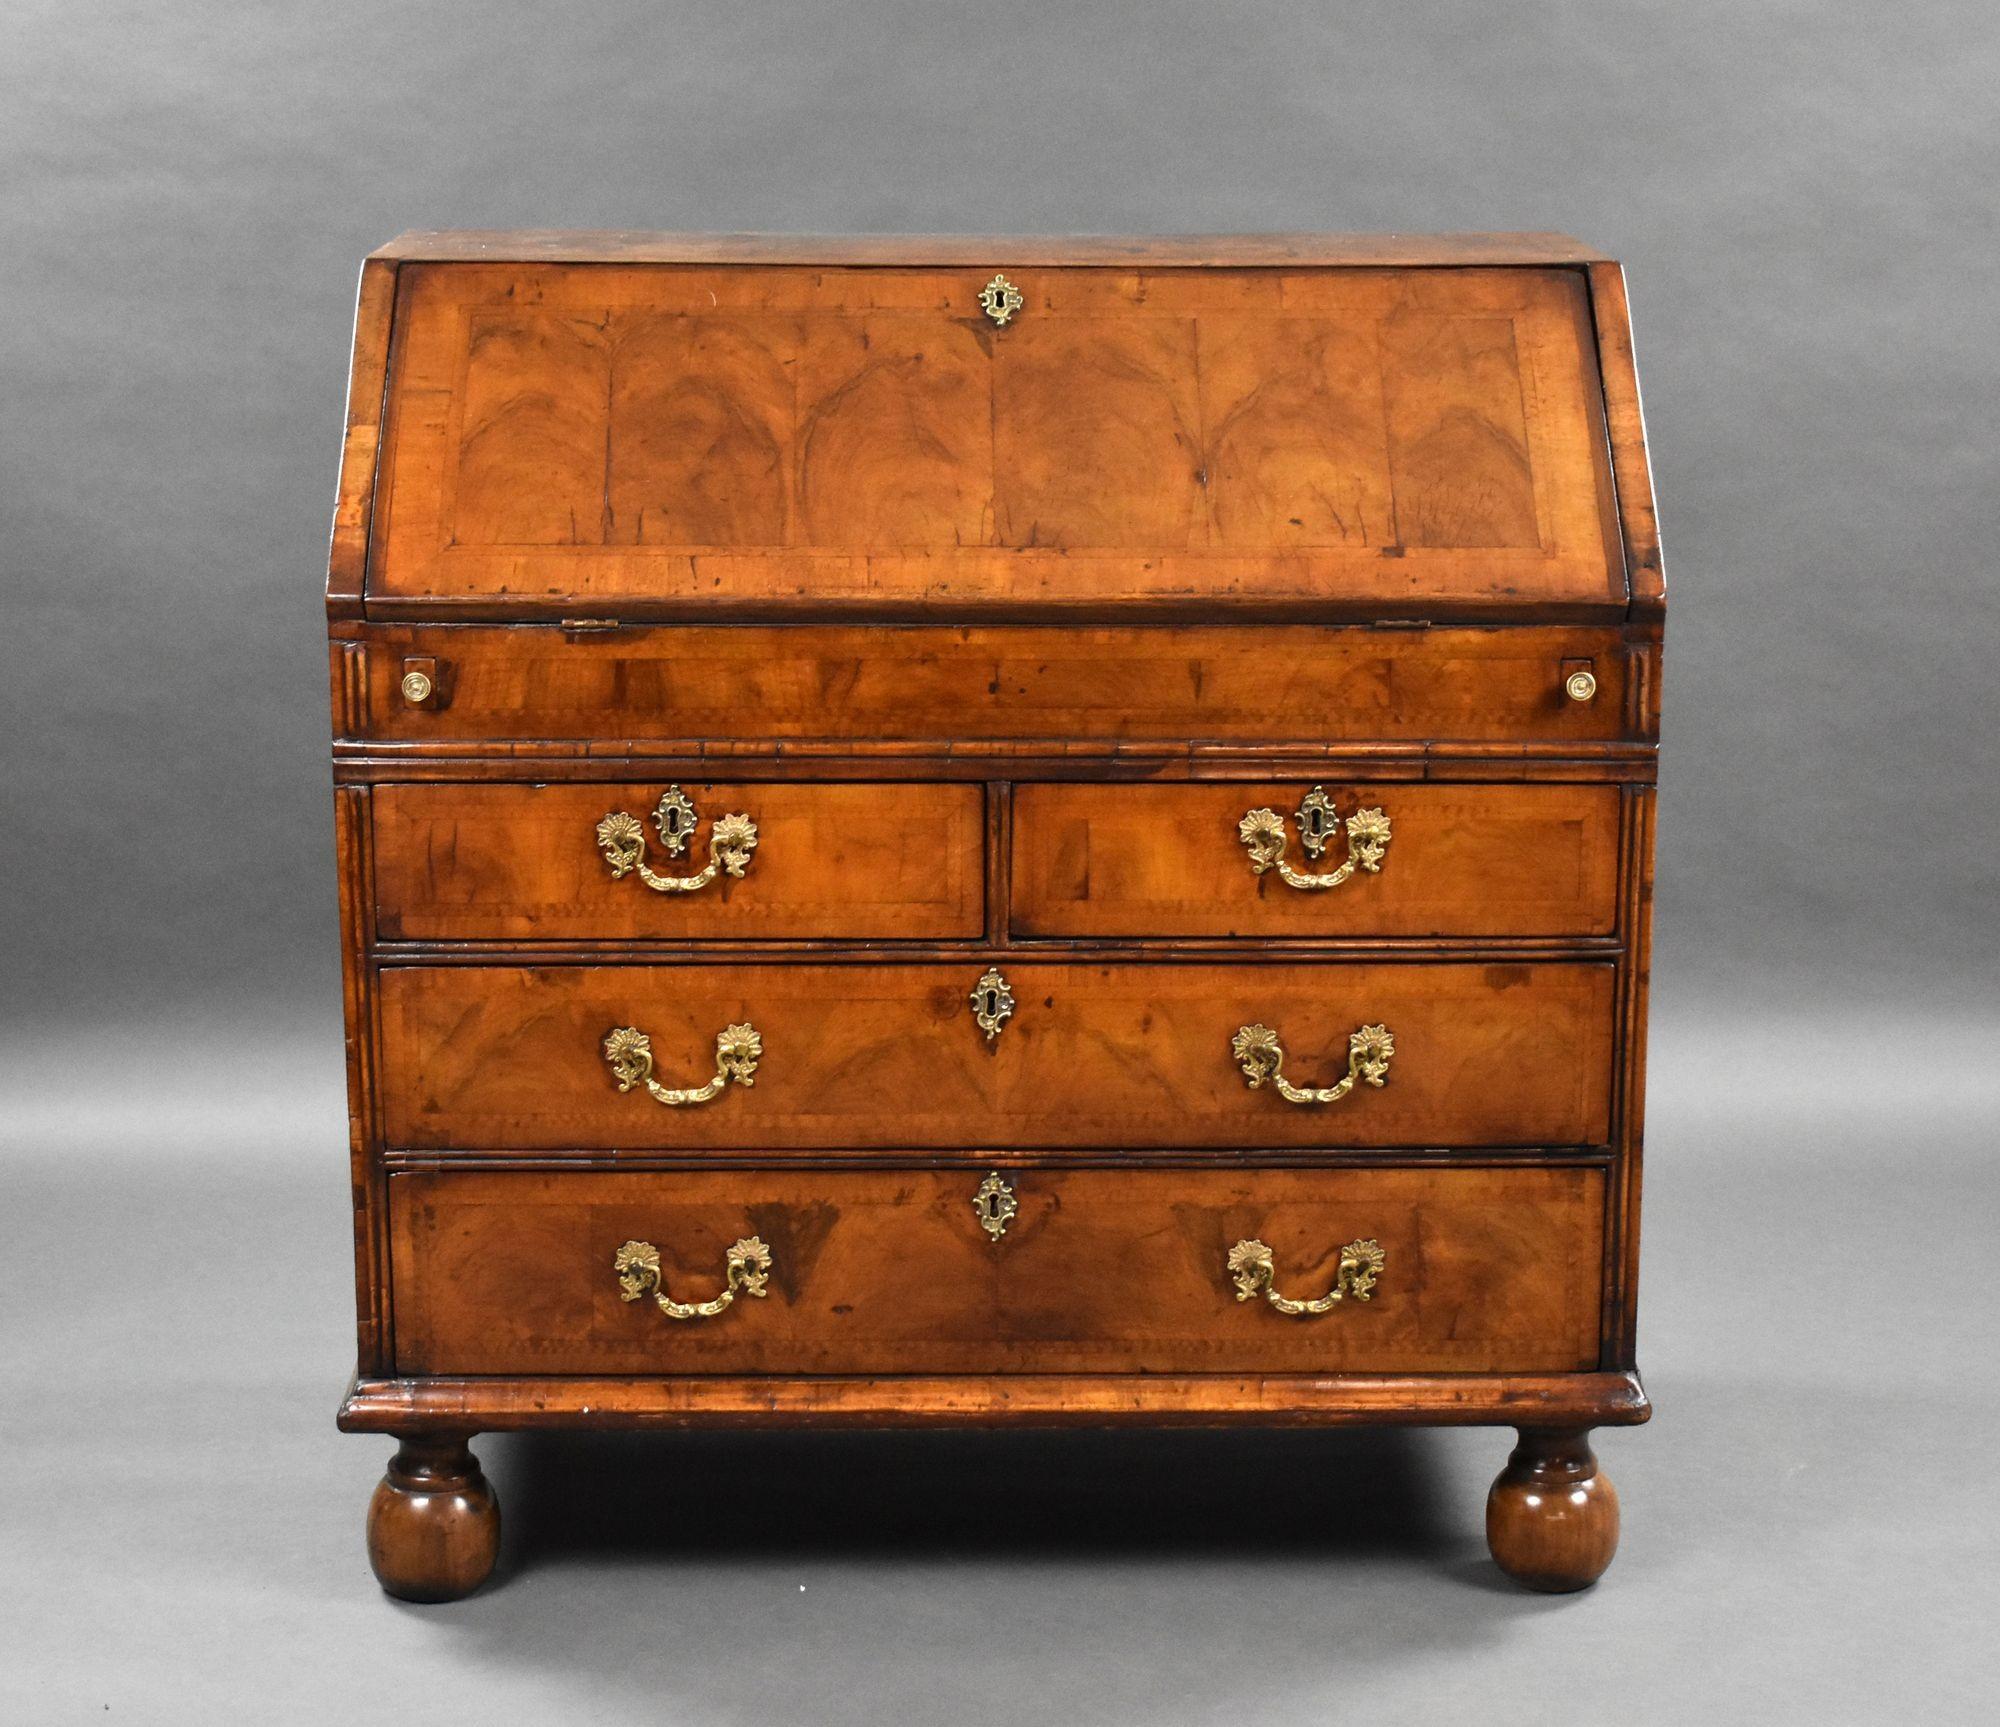 For sale is a good quality early 18th century George I walnut bureau, having a fall front opening to reveal a fully fitted interior comprising of drawers, pigeon holes, a well and a leather writing surface. Below this there is an arrangement of four